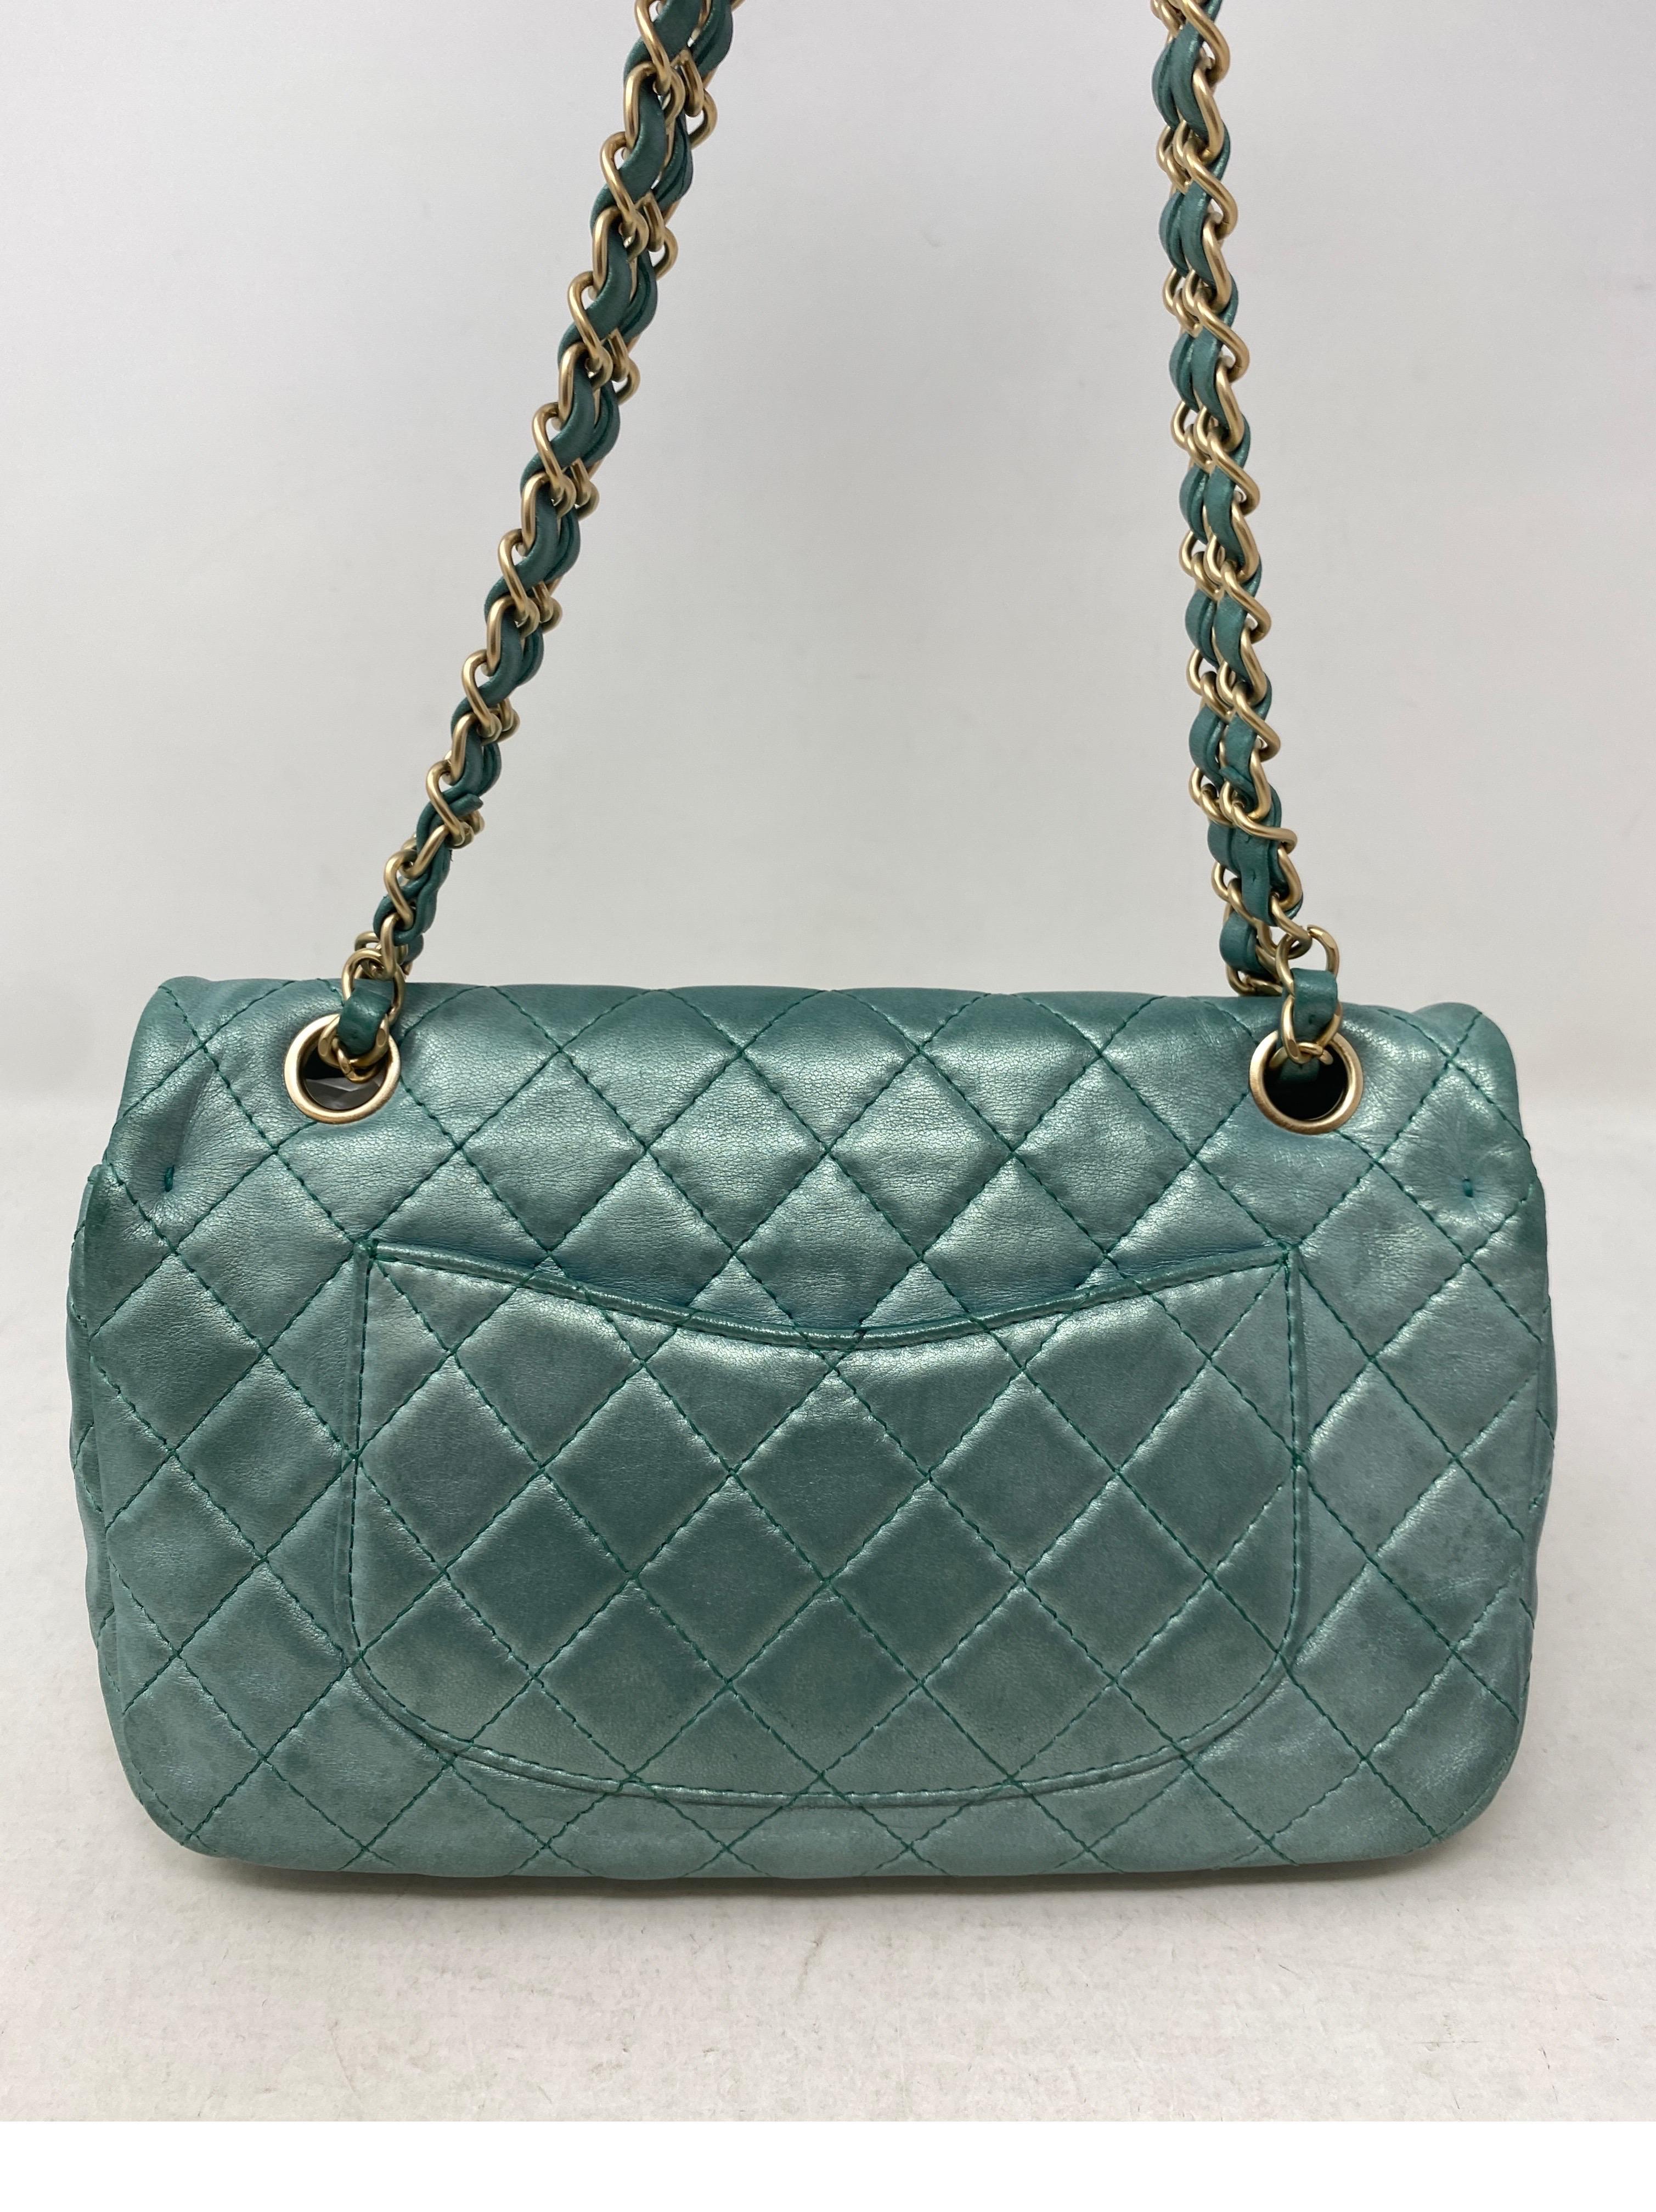 Women's or Men's Chanel Teal Jeweled Bag 